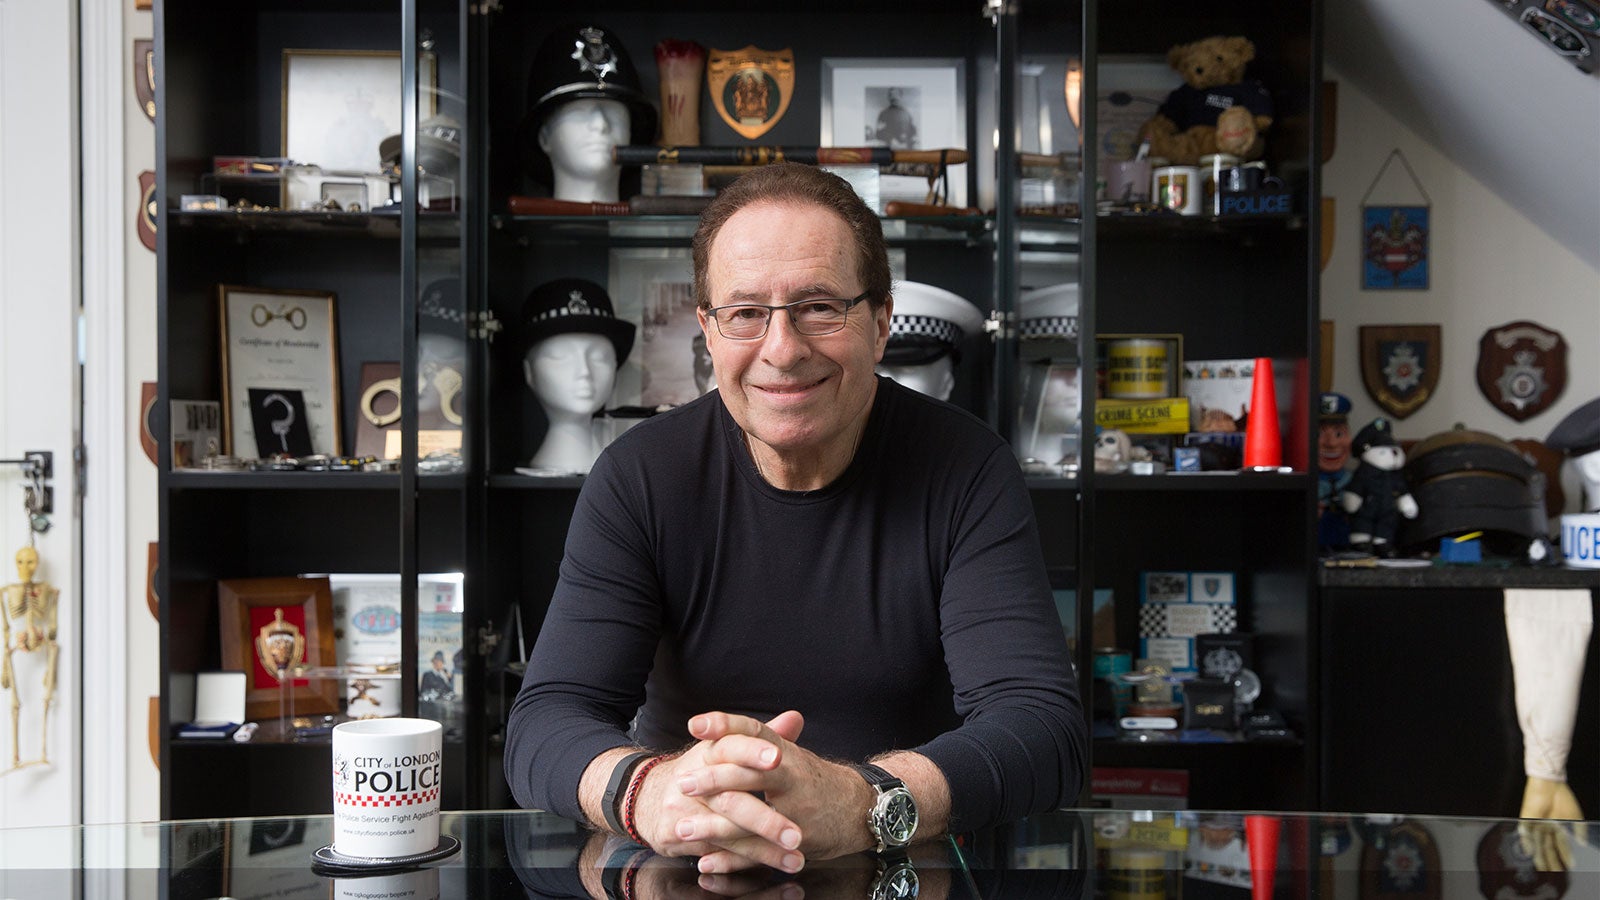 Peter James sat at a table surrounded by police memorabilia. 